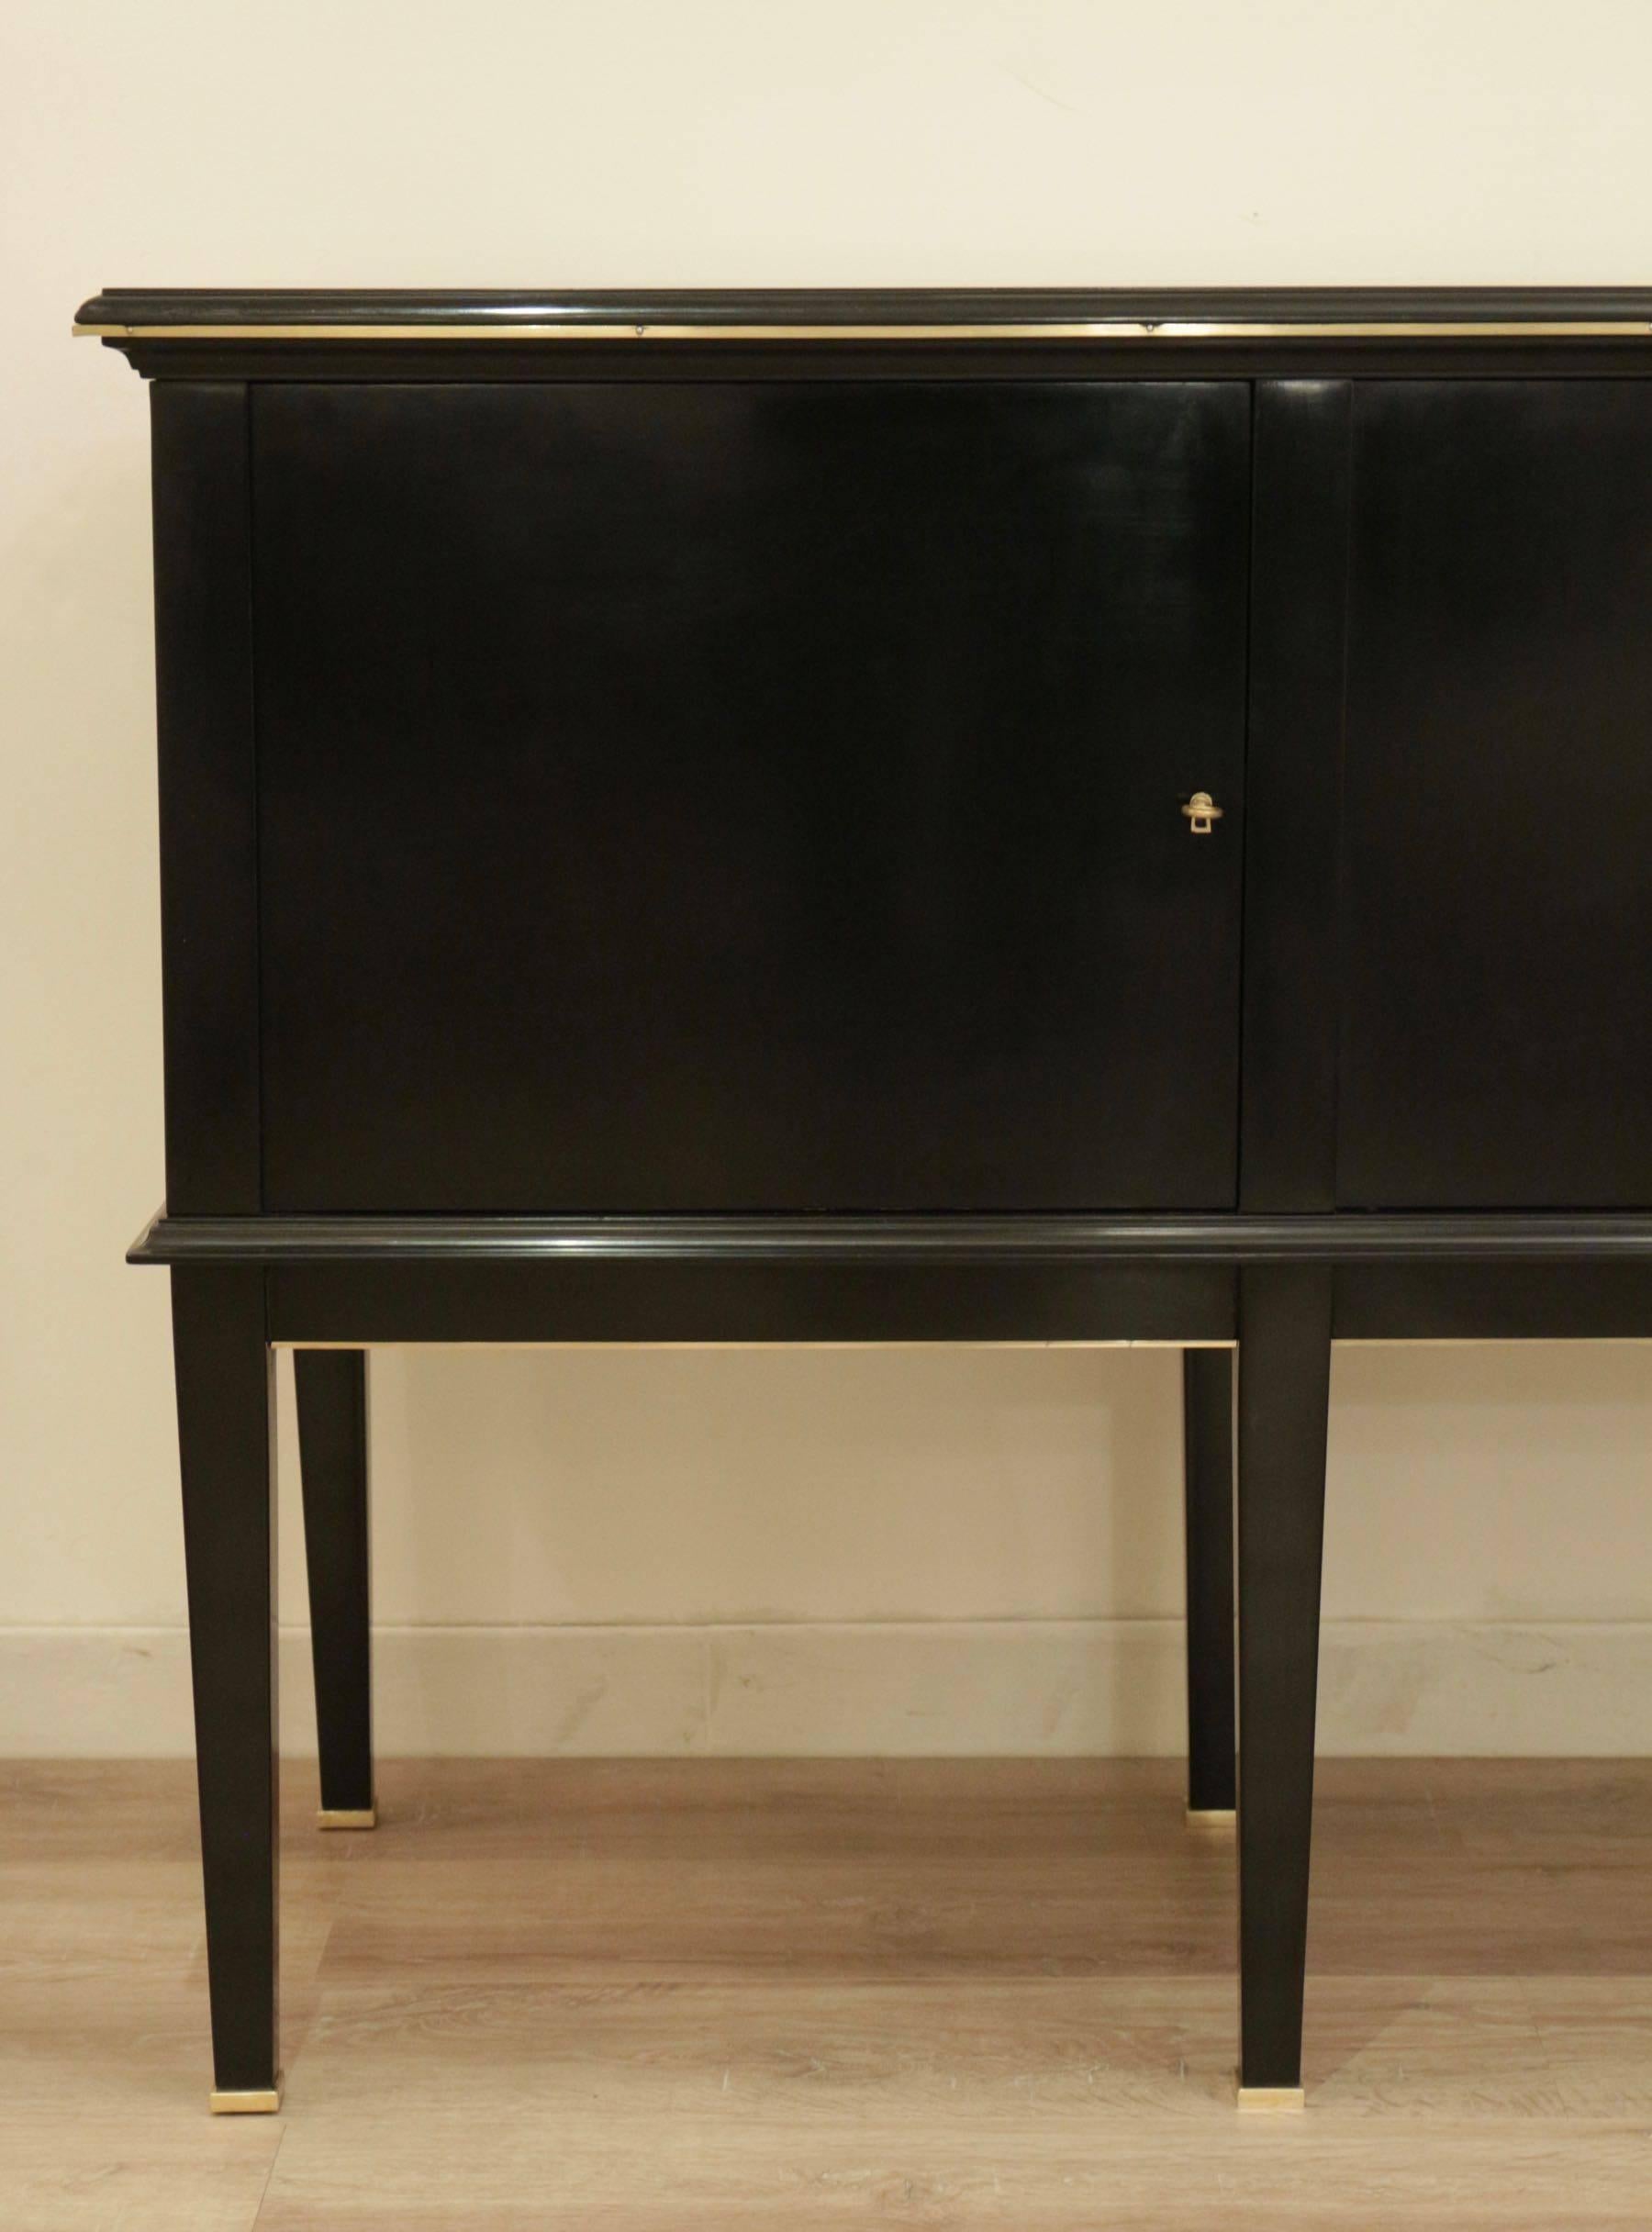 1940s black lacquered sideboard attributed to Maison Jansen

Elegant neoclassical sideboard with four doors soberly adorned with brass details: the eight feet are ended with square section of brass, the doors locks are framed with brass. The